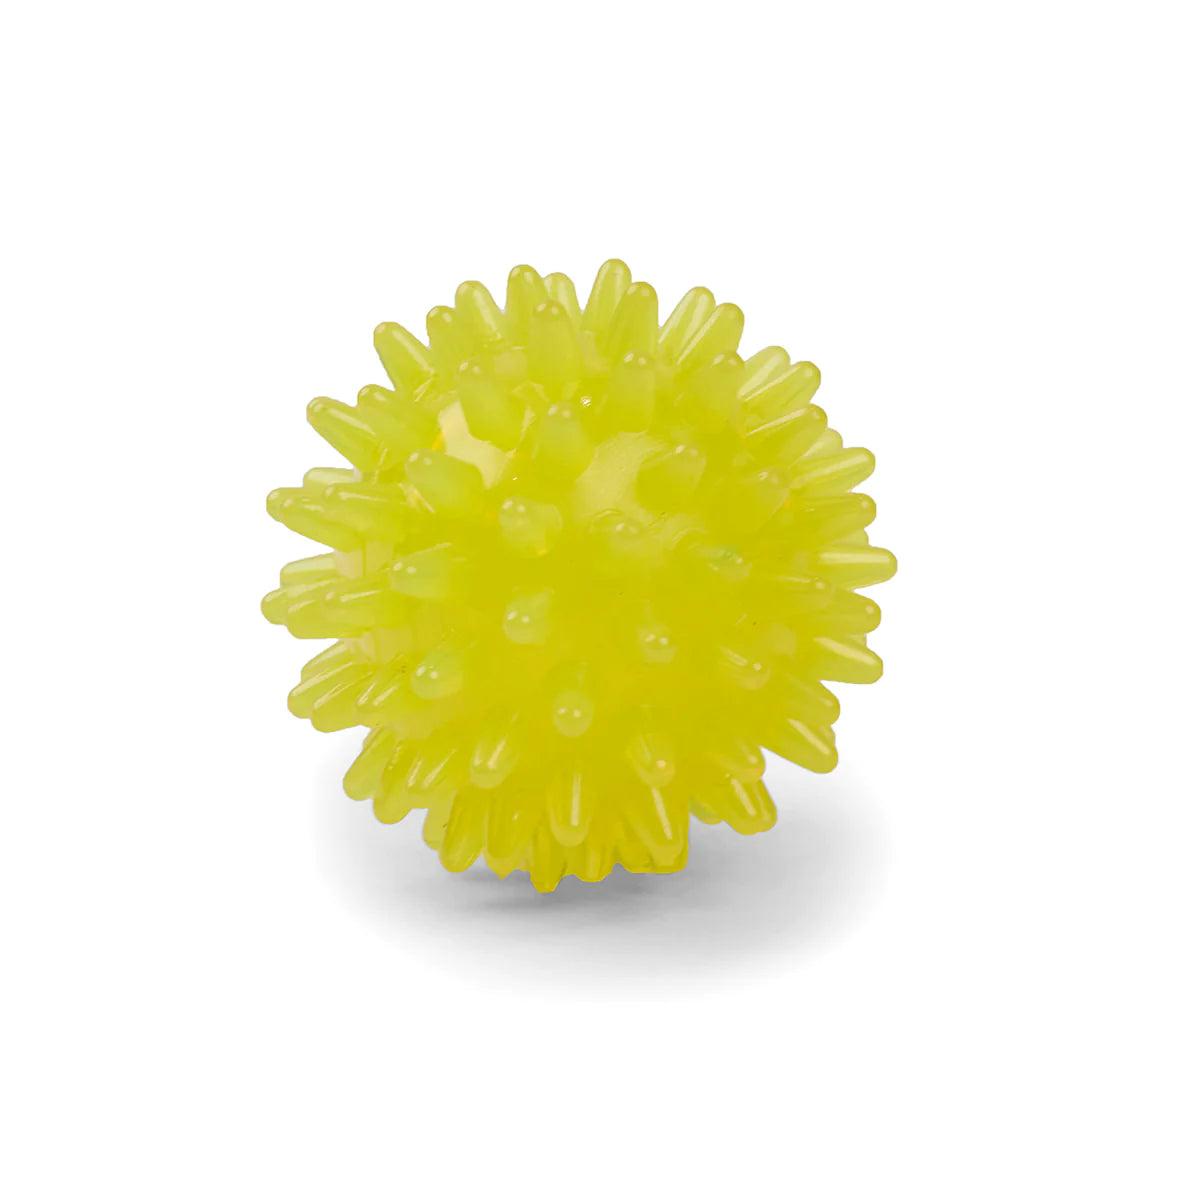 Tough Chewing Space Balls - Small Dog Toy